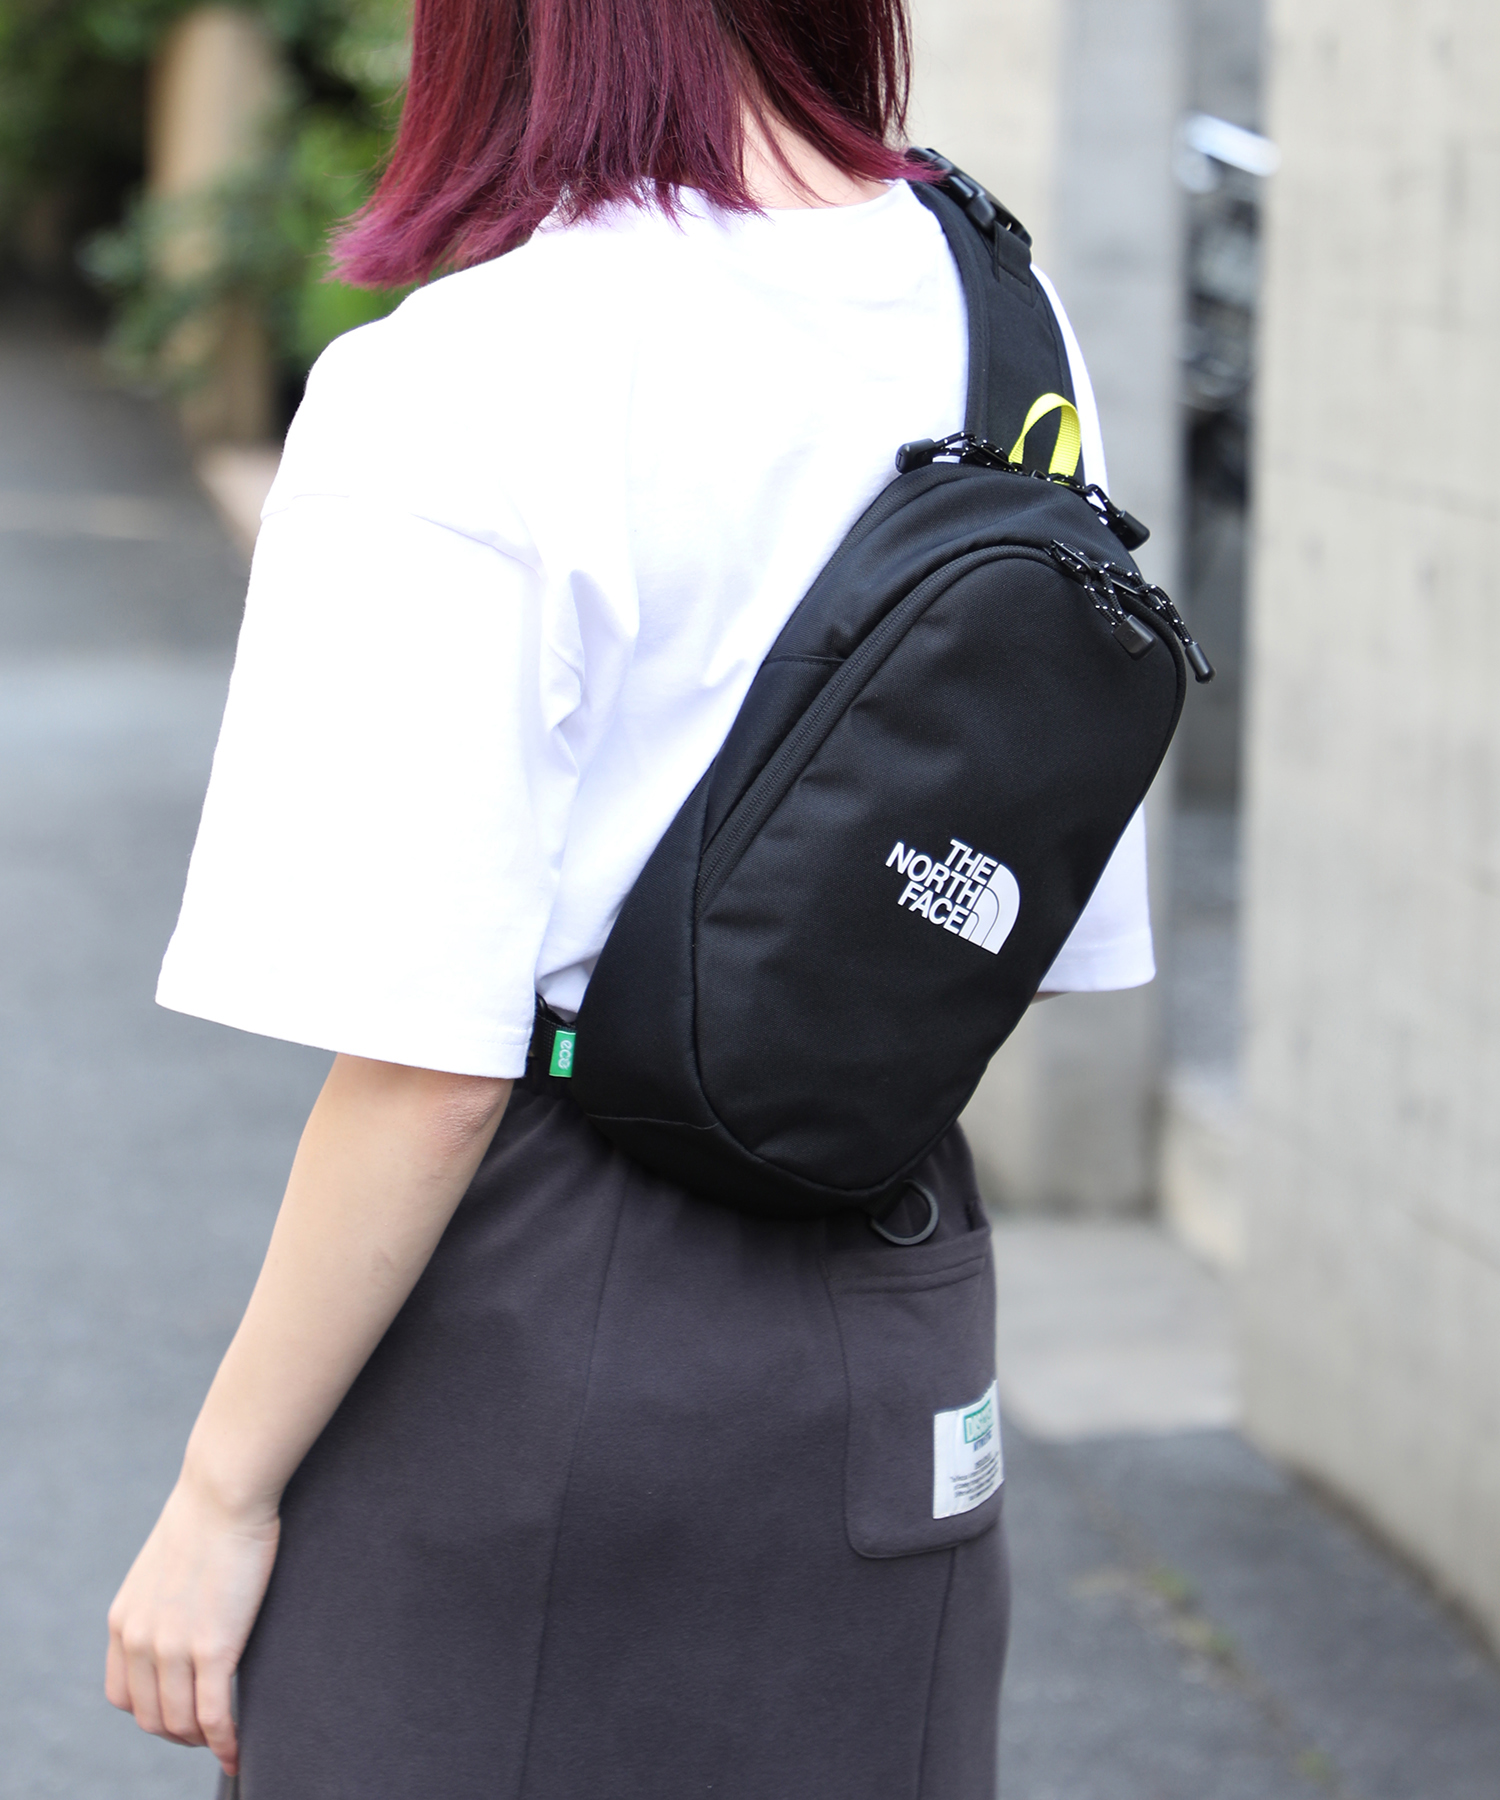 THE NORTH FACE / ザ・ノースフェイス】Simple Sports Oneway